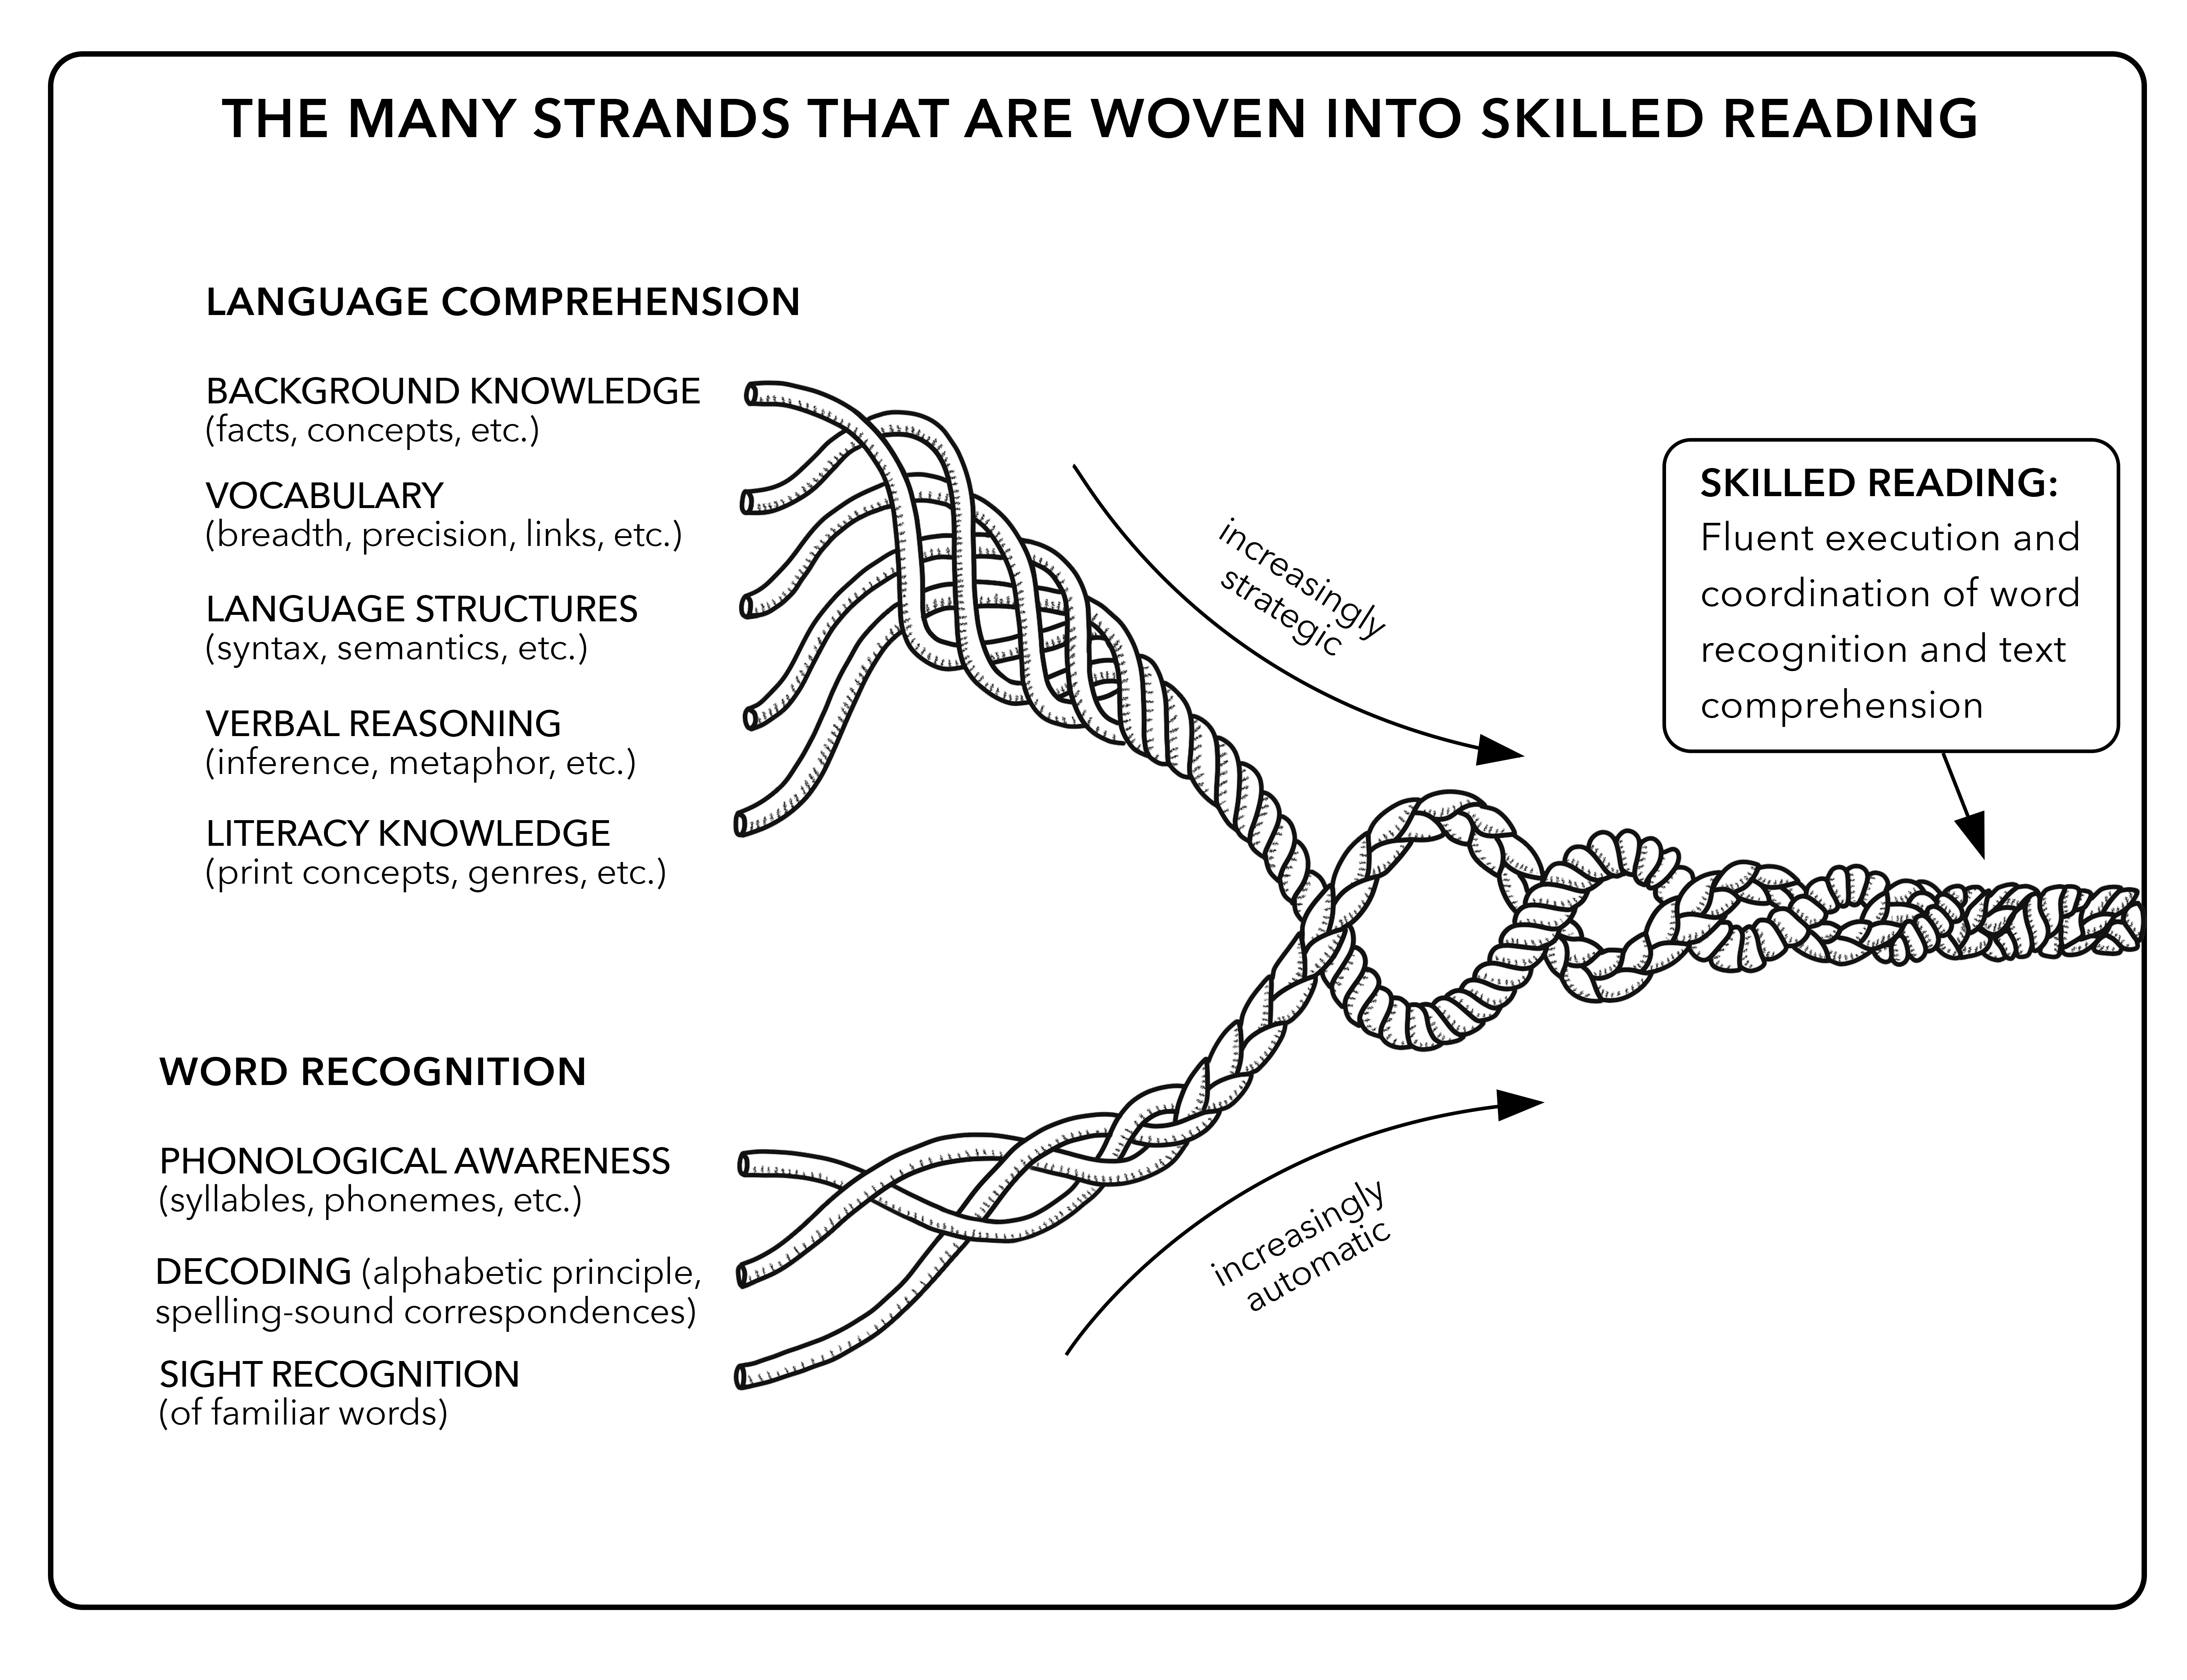 Image of Scarborough's Reading Rope made up of lower and upper strands depicting Language Comprehension and Word Recognition